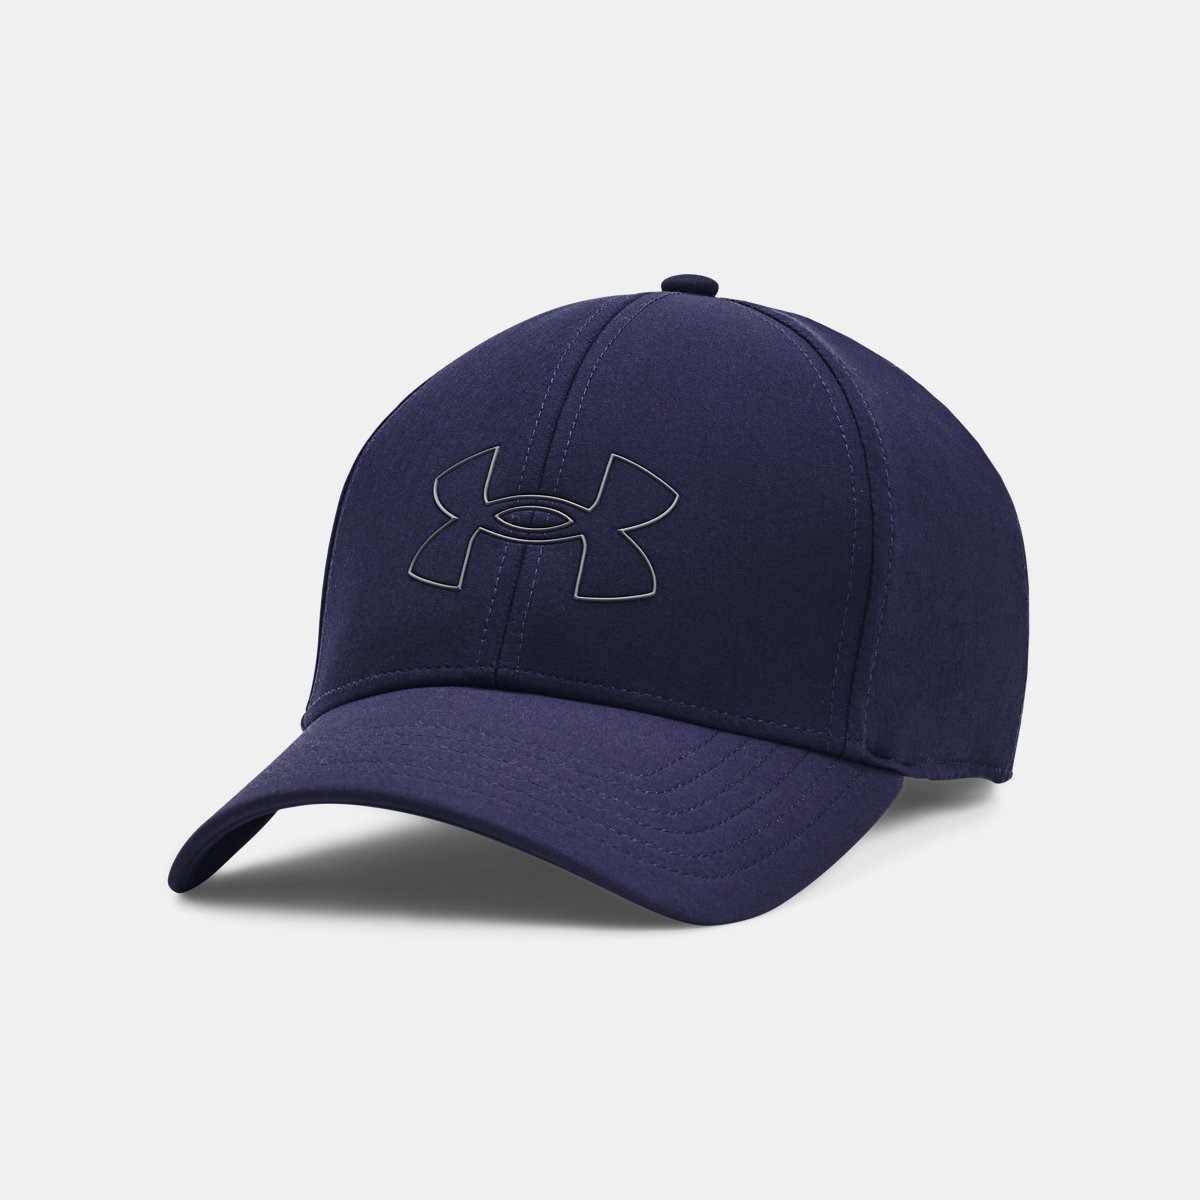 Man Cap in Blue by Under Armour GOOFASH